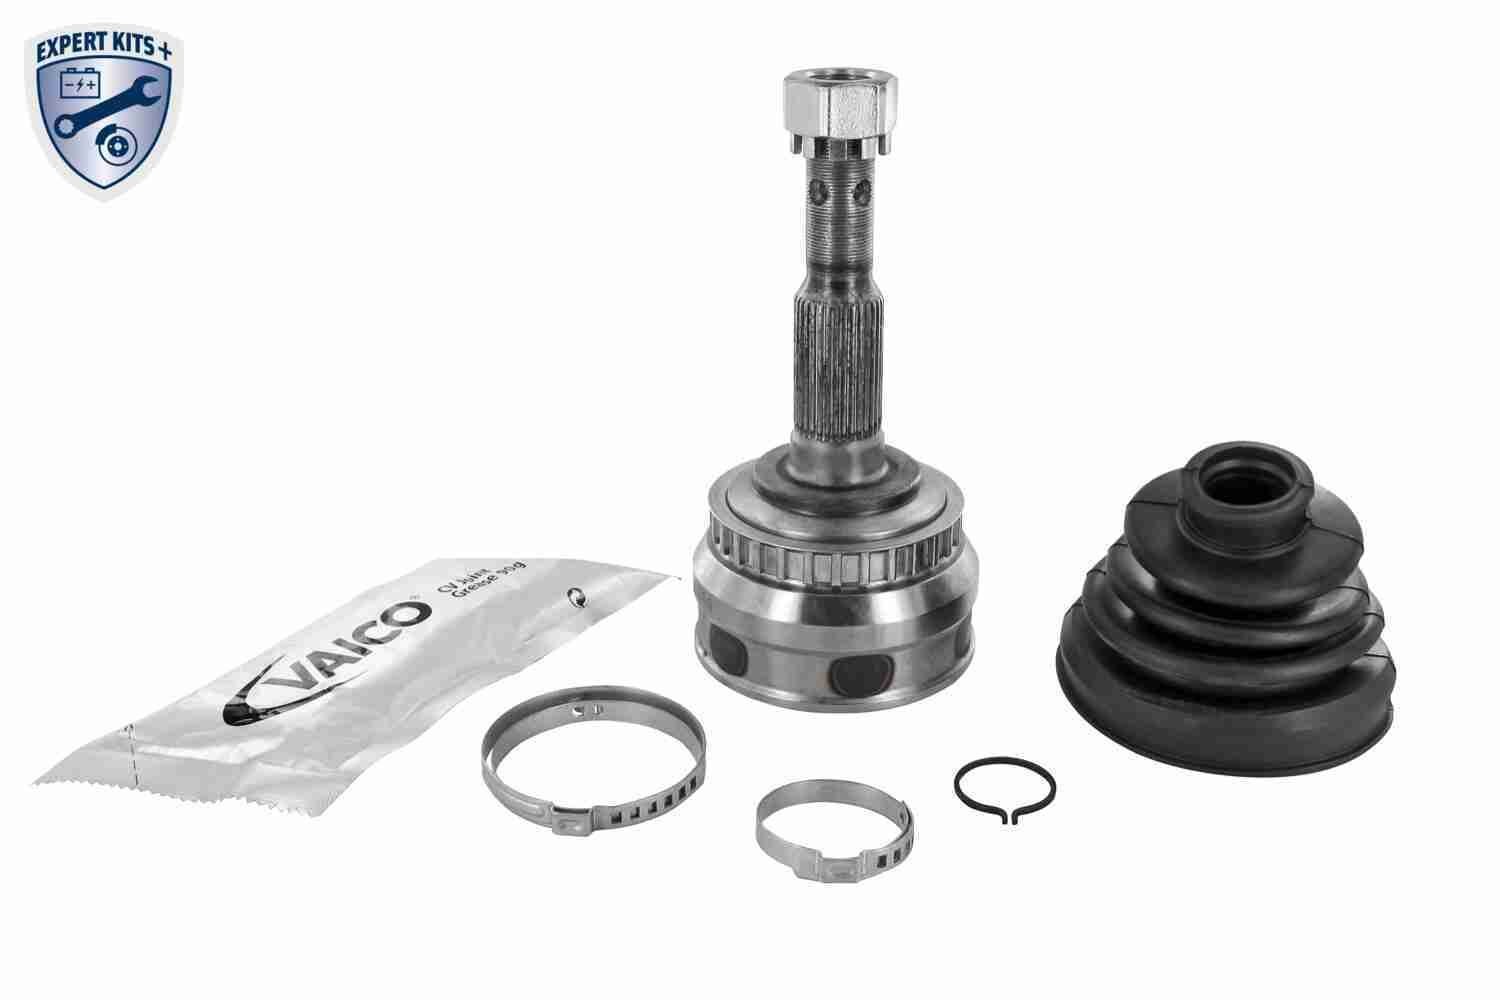 VAICO EXPERT KITS +, Wheel Side, with ABS ring External Toothing wheel side: 33, Internal Toothing wheel side: 25, Number of Teeth, ABS ring: 29 CV joint V40-0200 buy